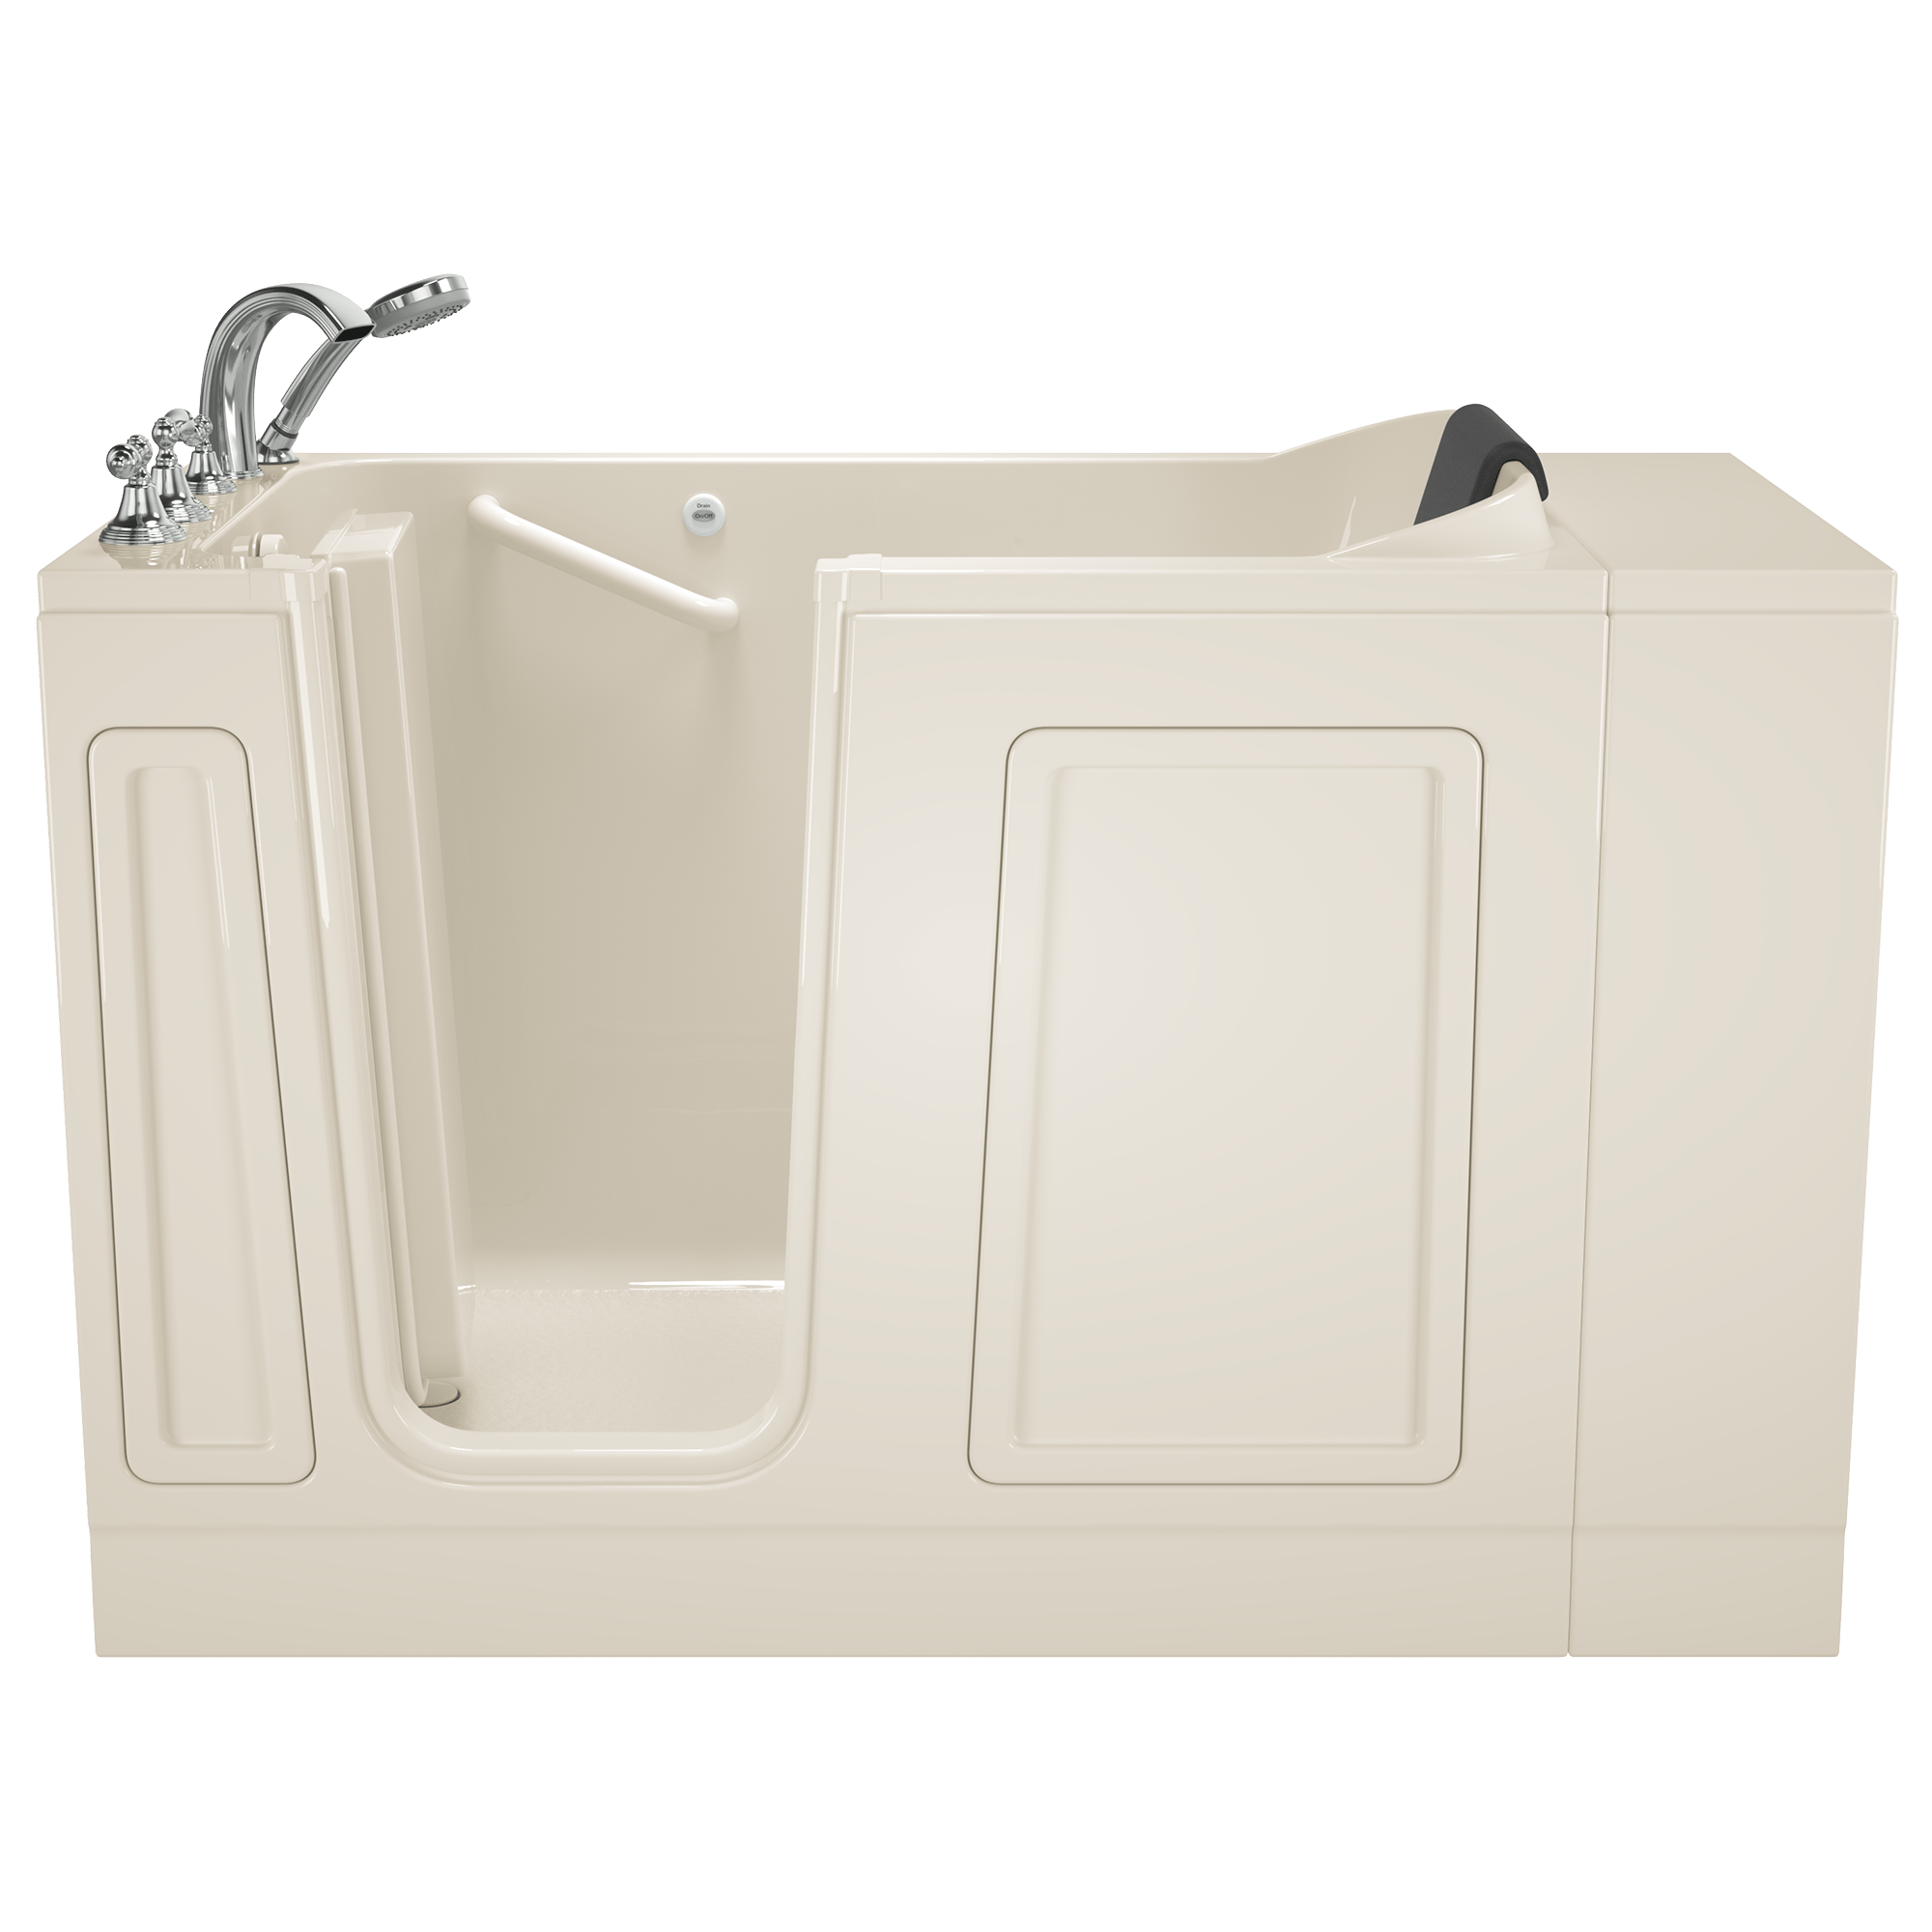 Acrylic Luxury Series 30 x 51 -Inch Walk-in Tub With Soaker System - Left-Hand Drain With Faucet